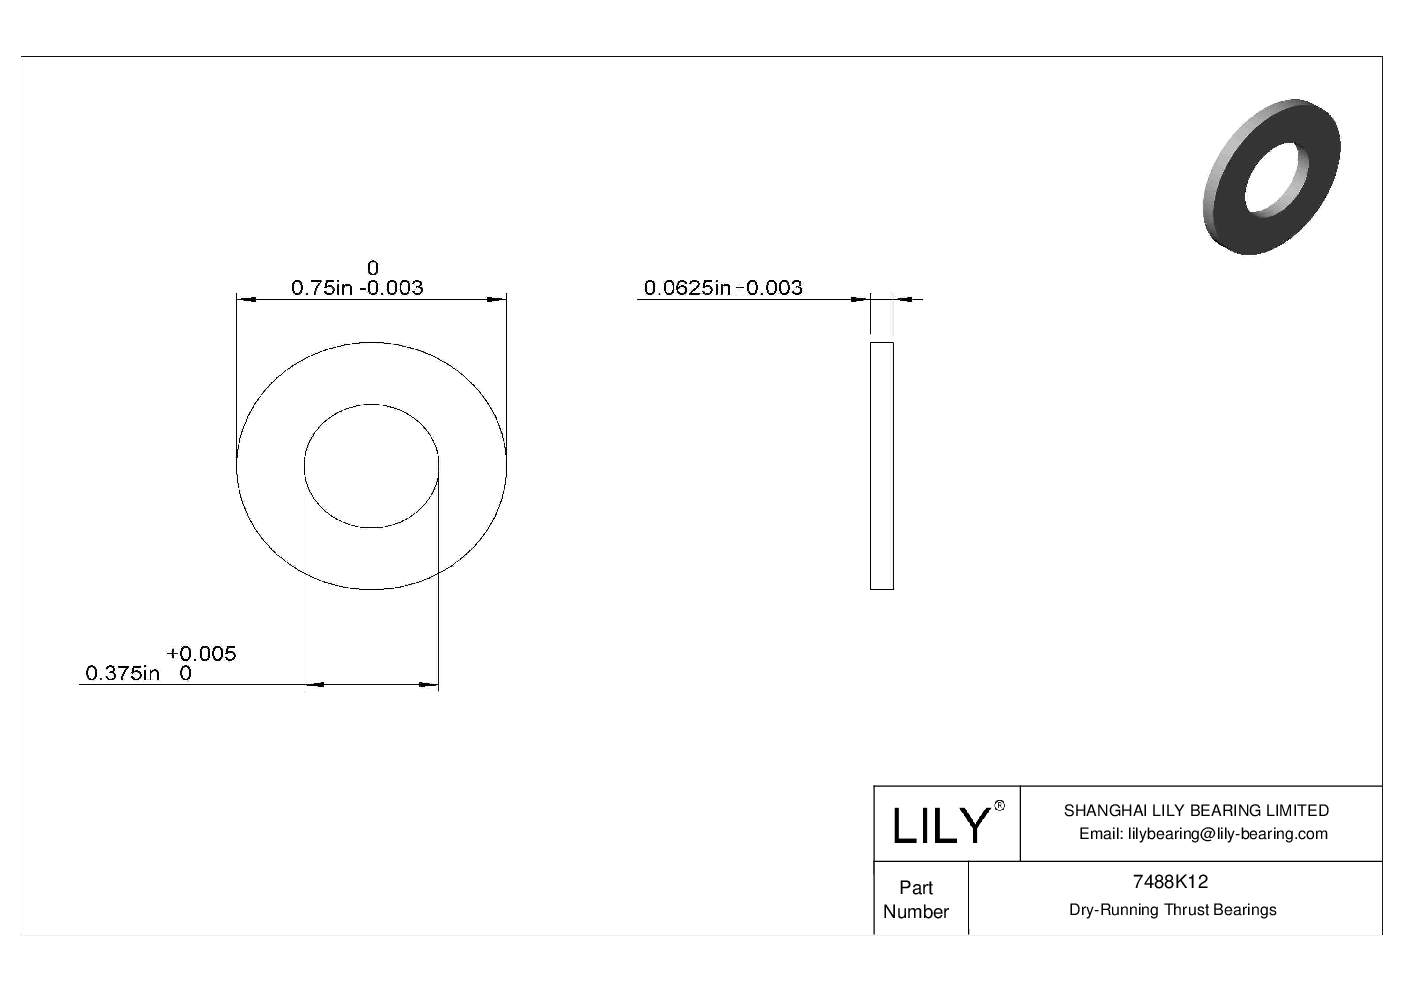 HEIIKBC Ultra-Low-Friction Dry-Running Thrust Bearings cad drawing